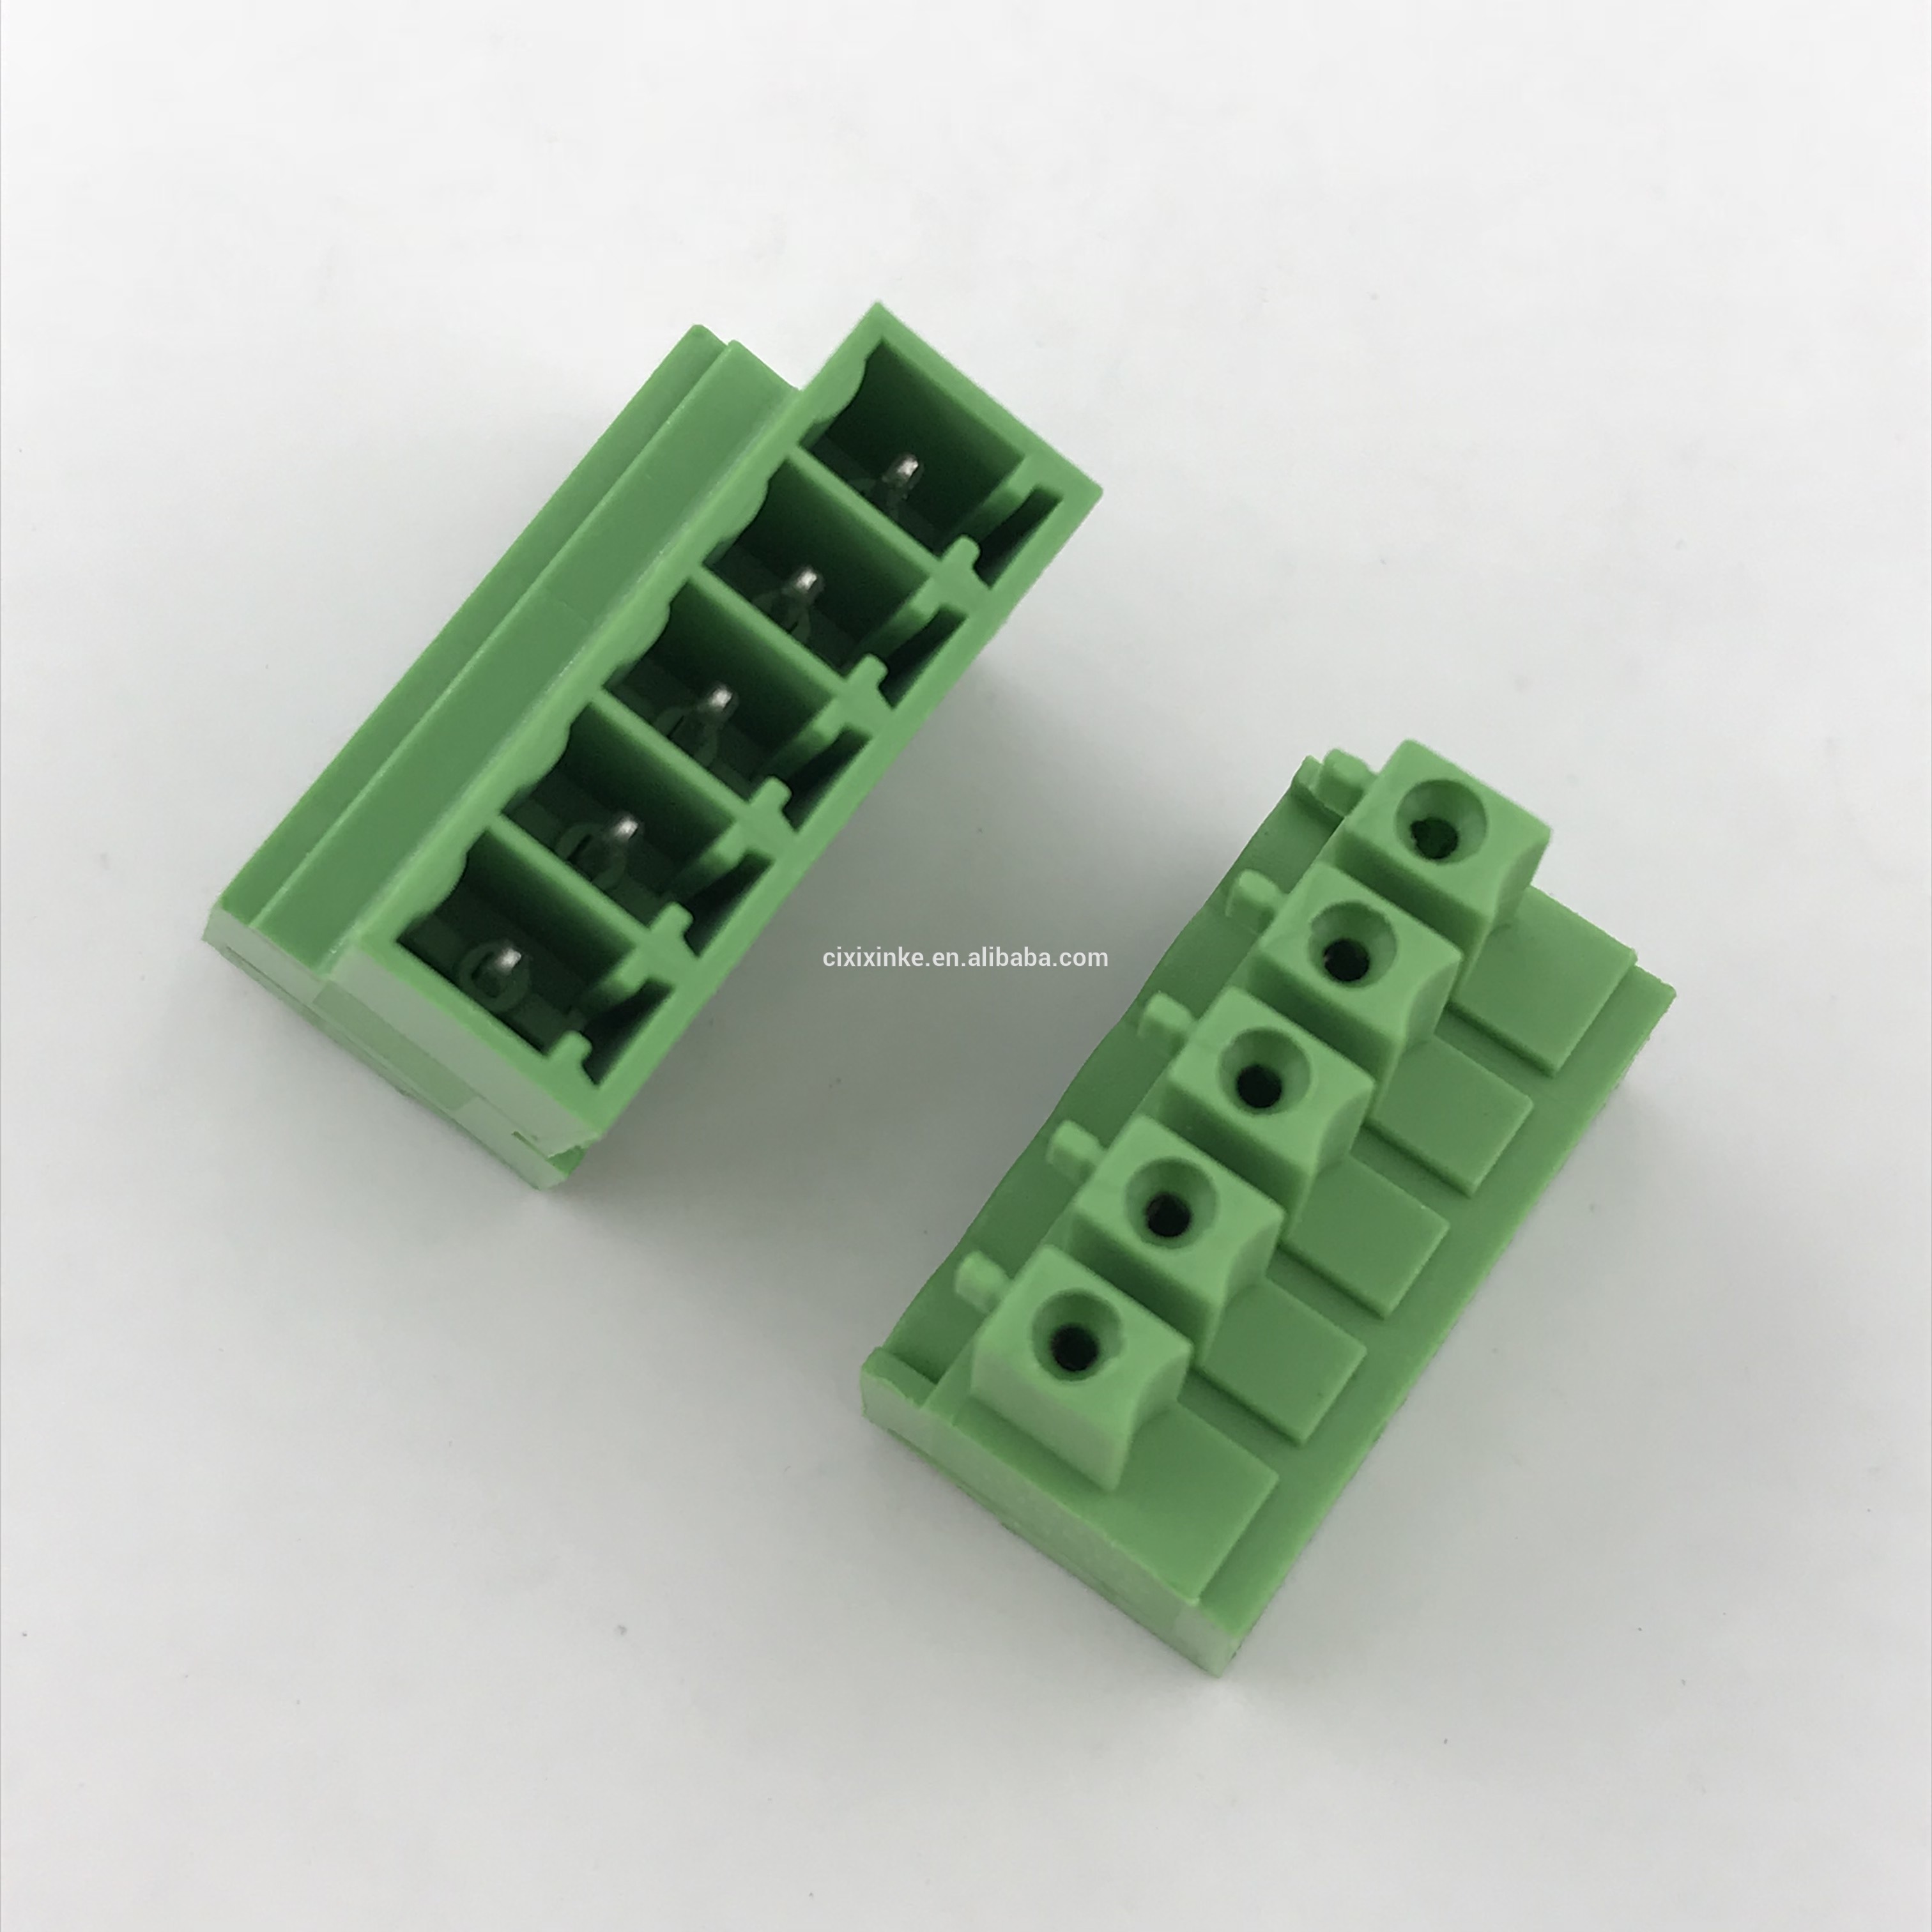 5 contacts of wiring screw pluggable terminal block